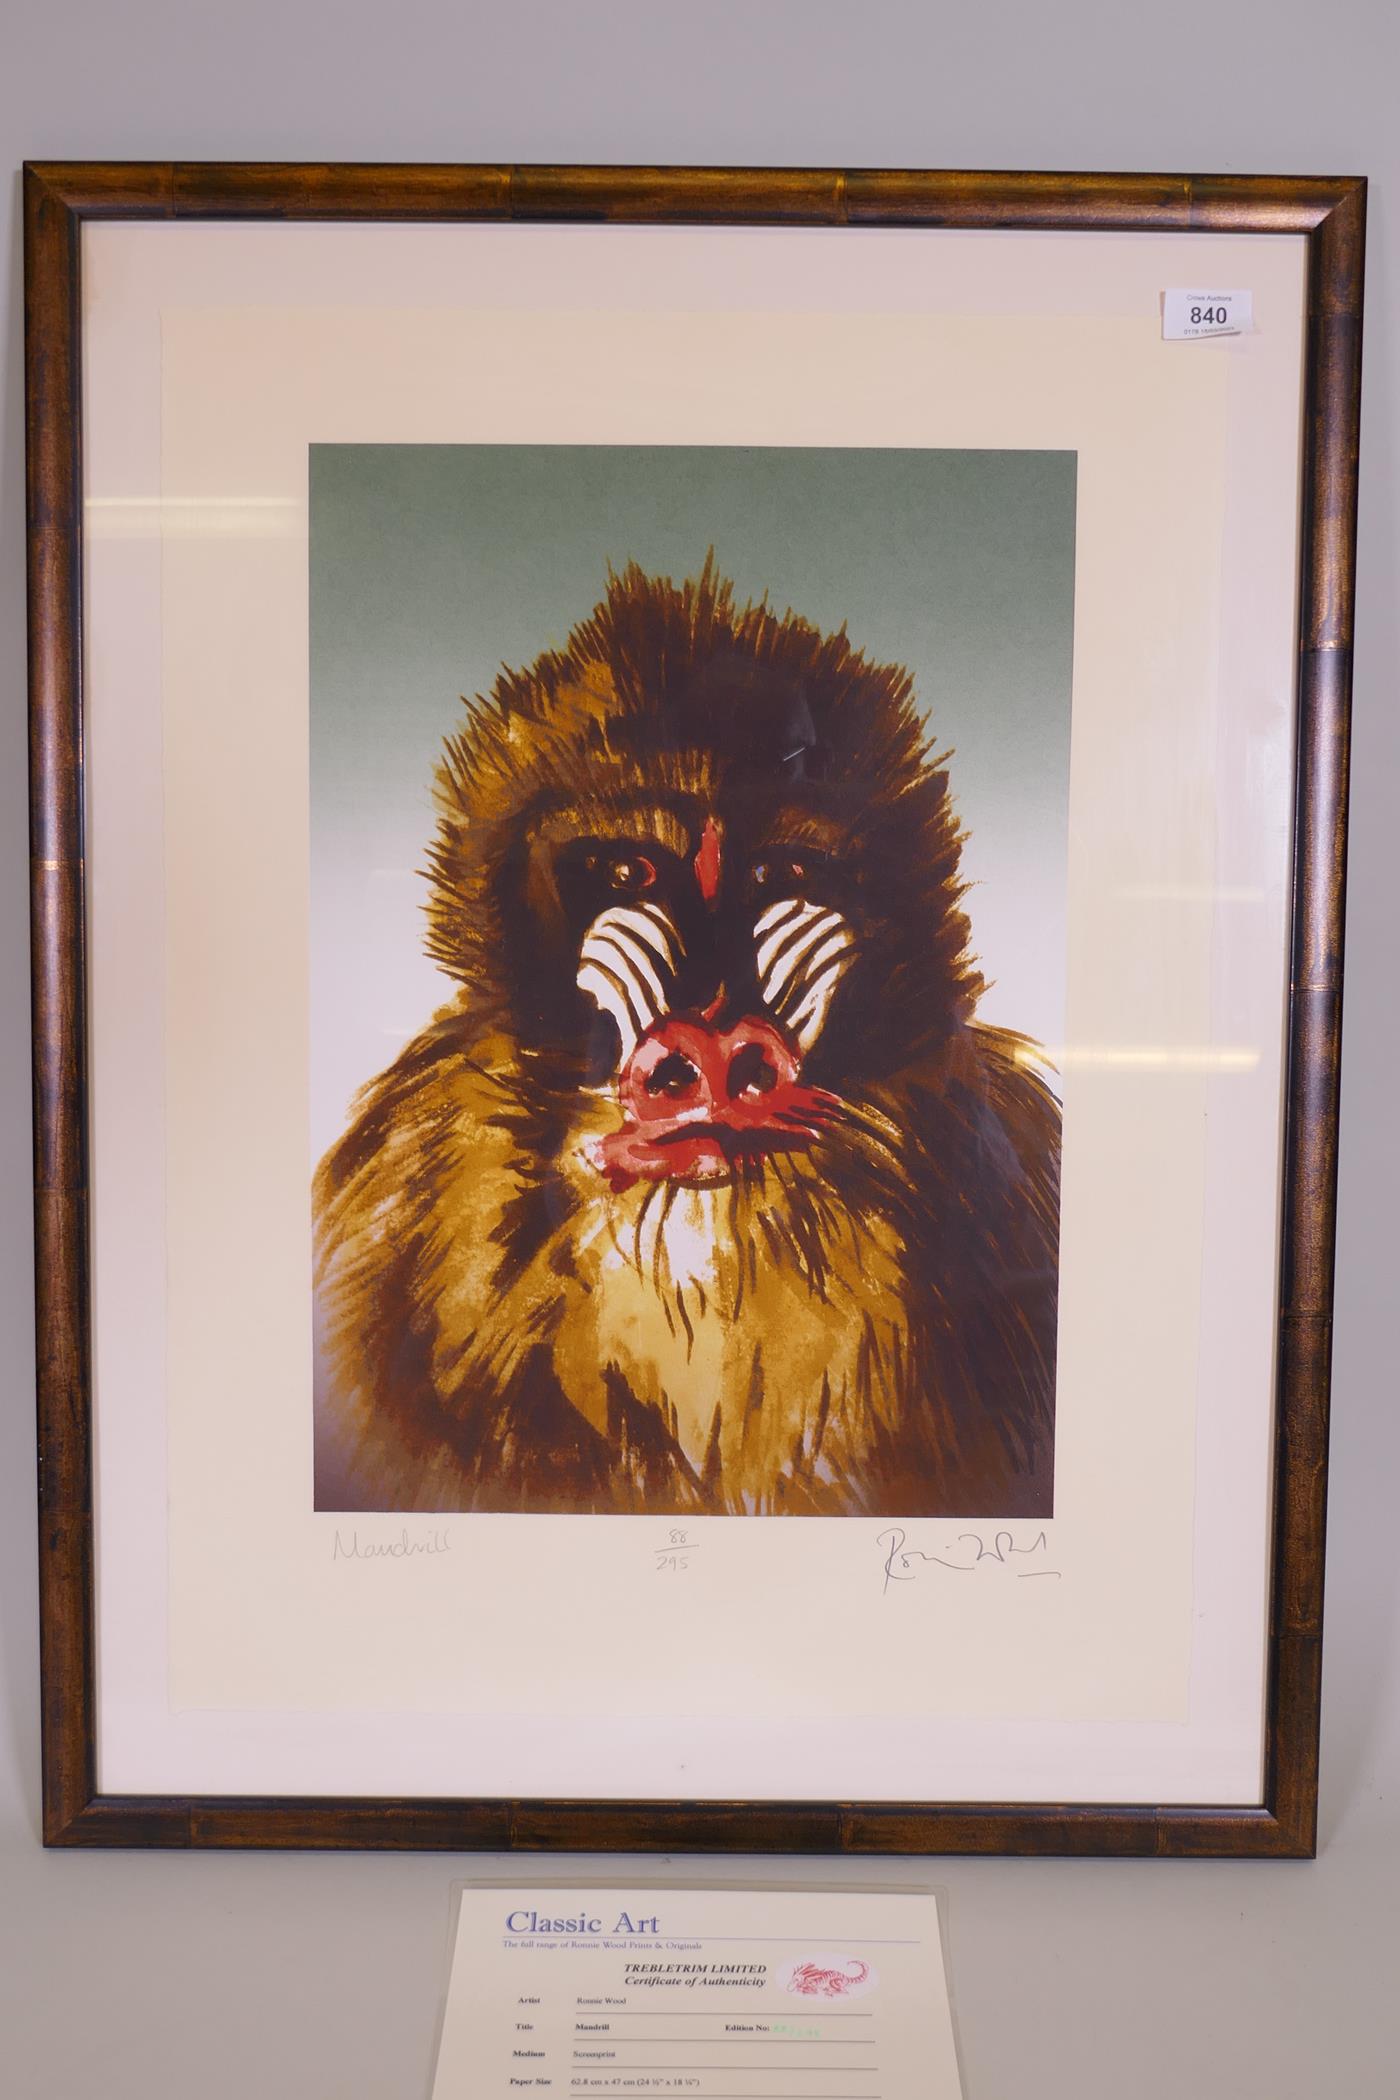 Ronnie Wood - Rolling Stones signed limited edition screenprint, 88/295 Mandrill, published - Image 2 of 4